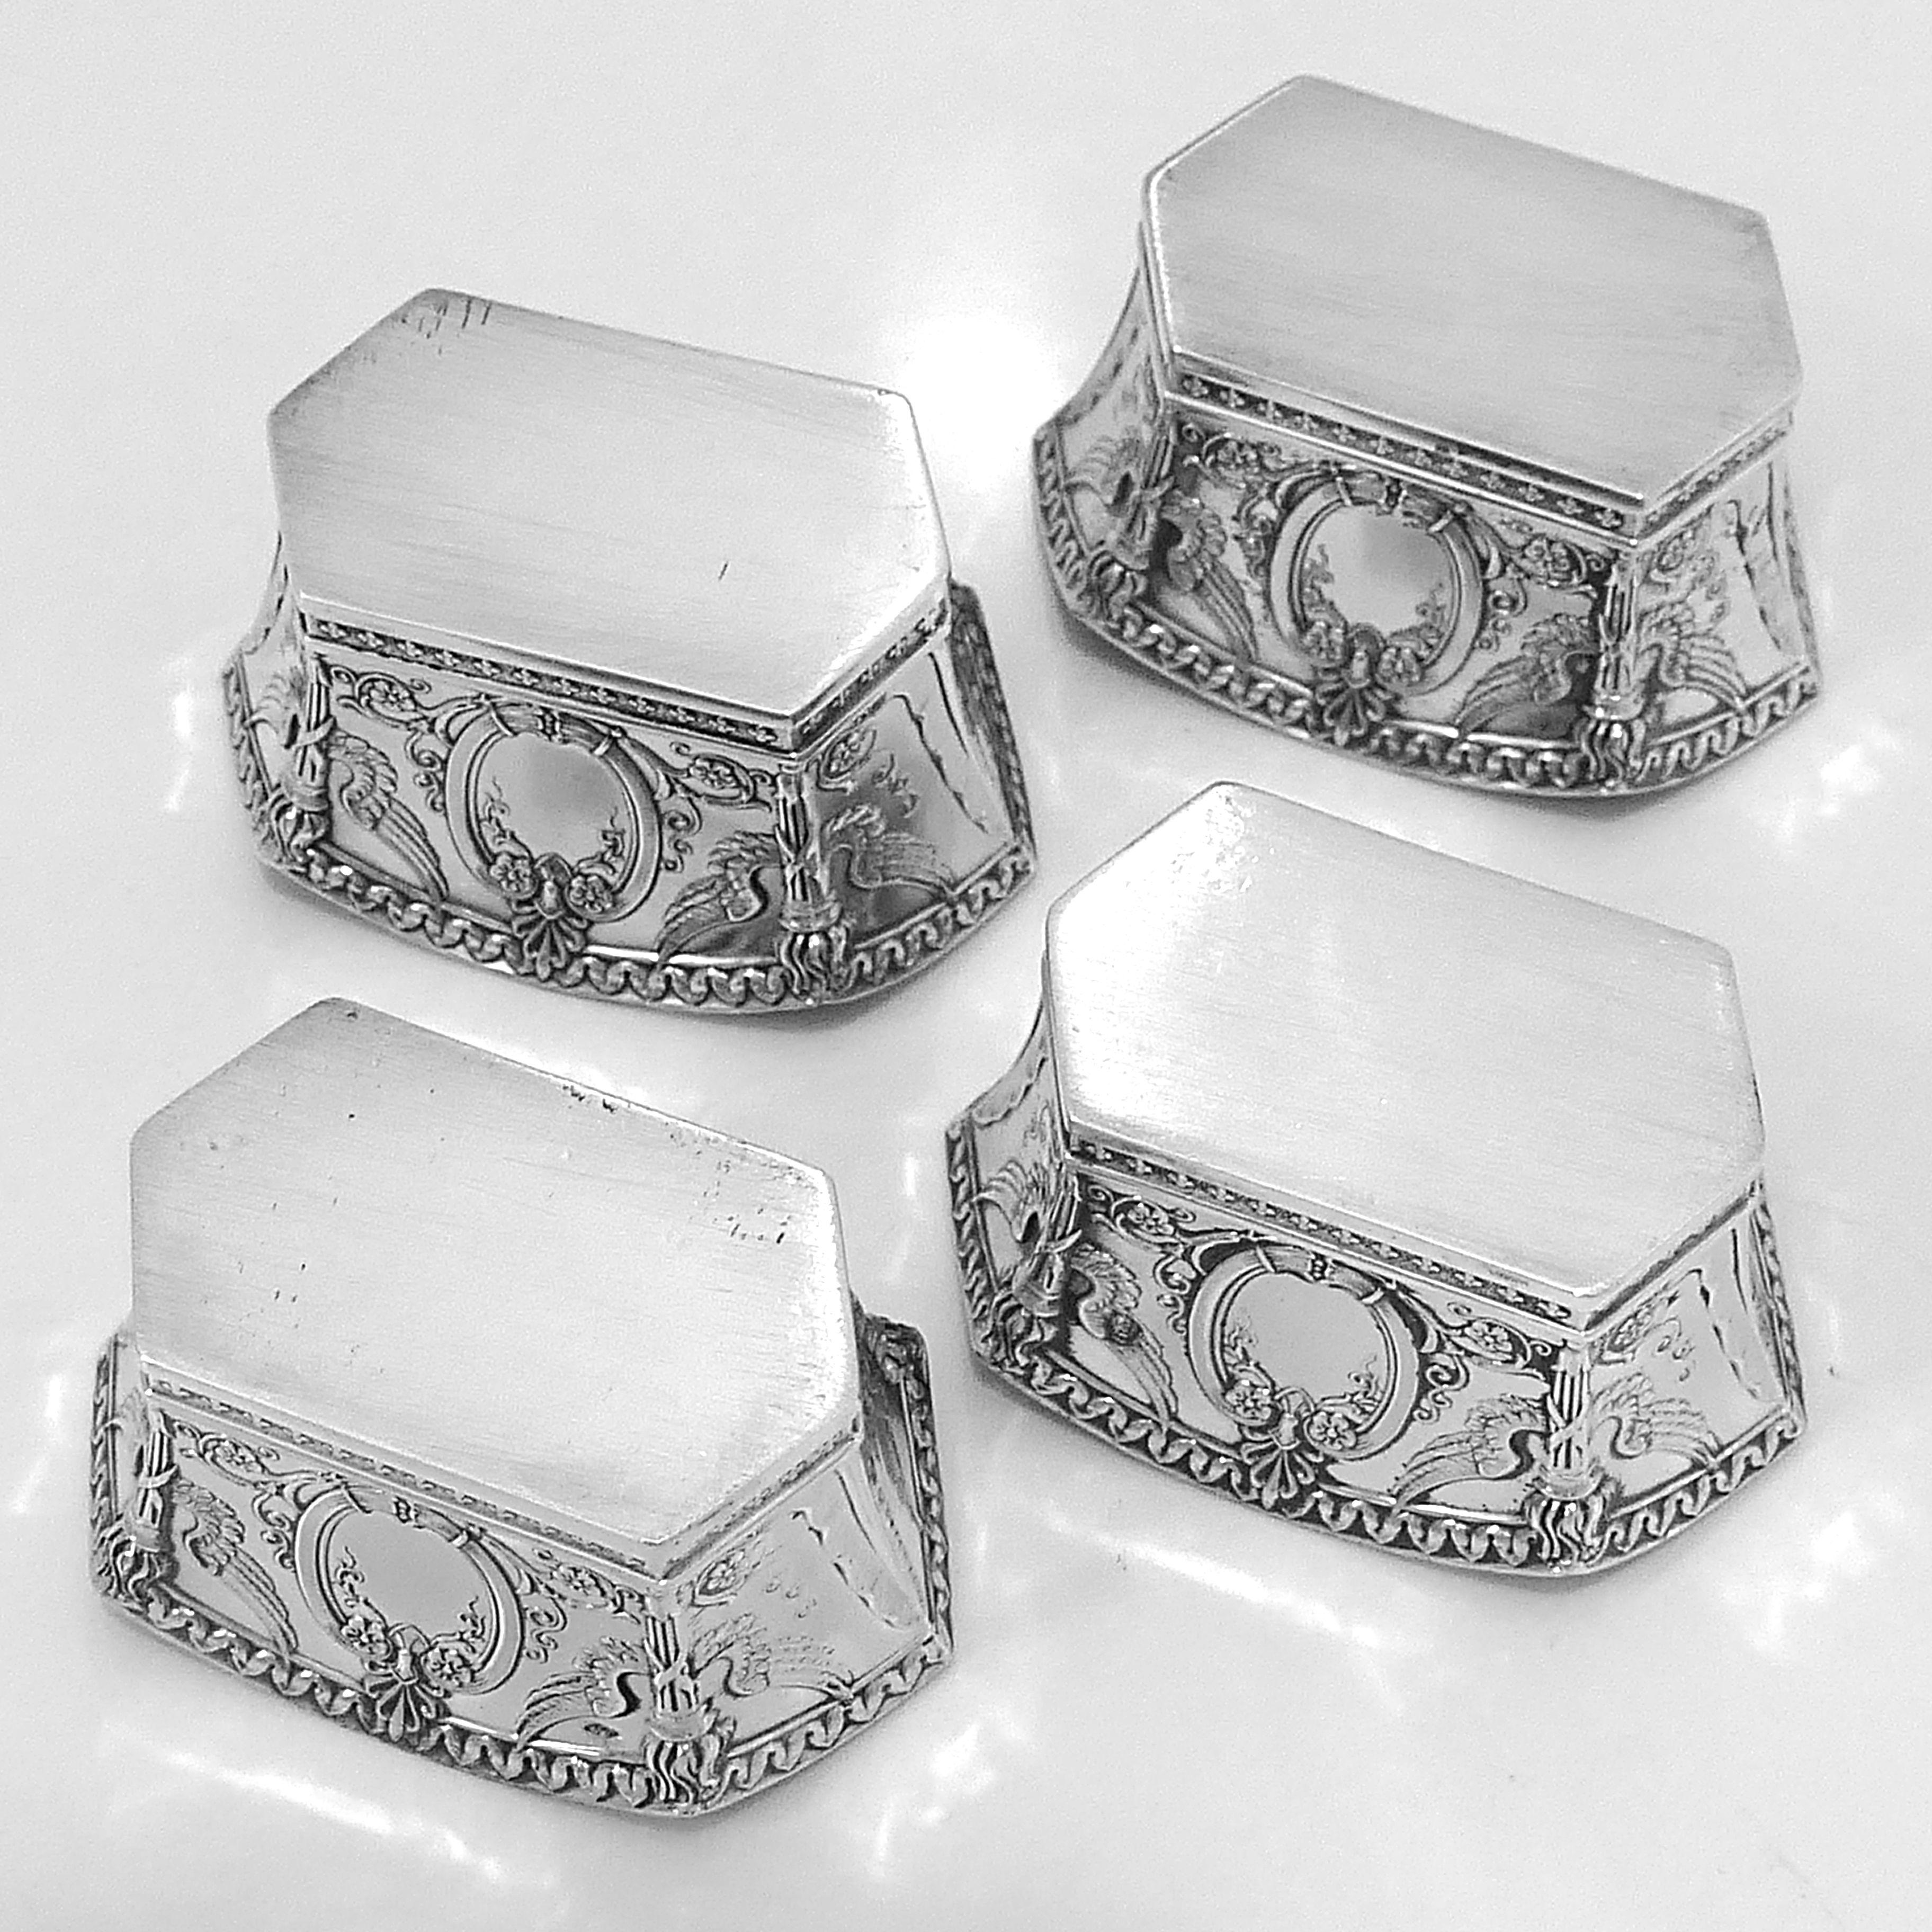 Lapparra Masterpiece French Sterling Silver 4 Salt Cellars, Original Box, Empire For Sale 2